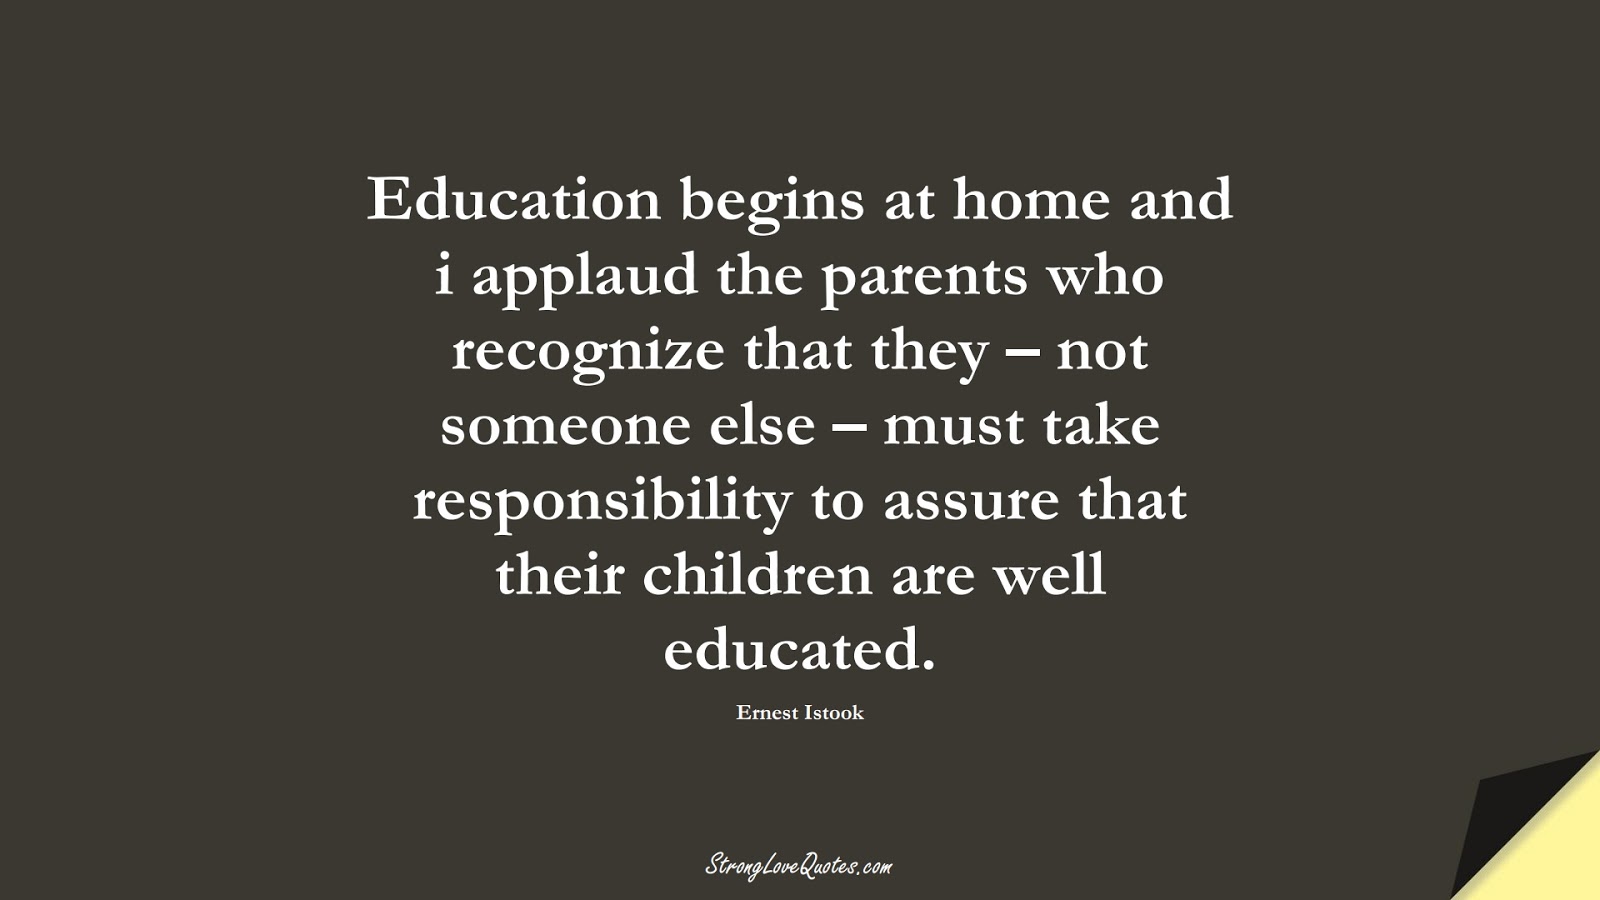 Education begins at home and i applaud the parents who recognize that they – not someone else – must take responsibility to assure that their children are well educated. (Ernest Istook);  #EducationQuotes